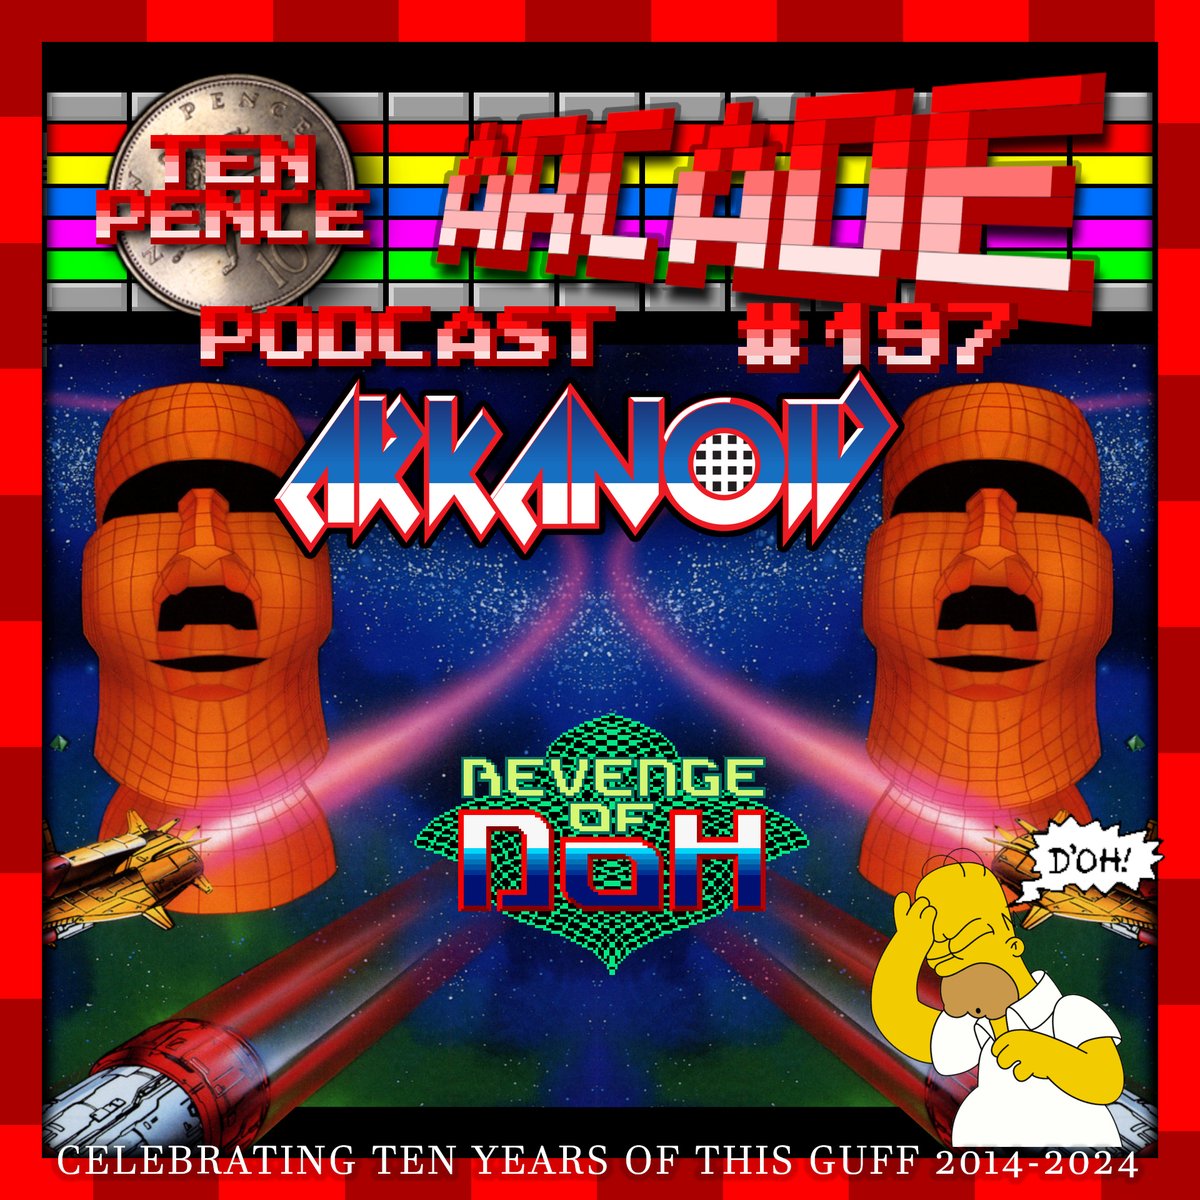 This month we are playing Homer Simpson's favourite game, Akanoid Revenge of DOH. Your job here is to destroy annoying bricks. Don't ask me why, but they really just get on my nerves. Stoopid bricks. Anyway, website is here bit.ly/3PxTHDo